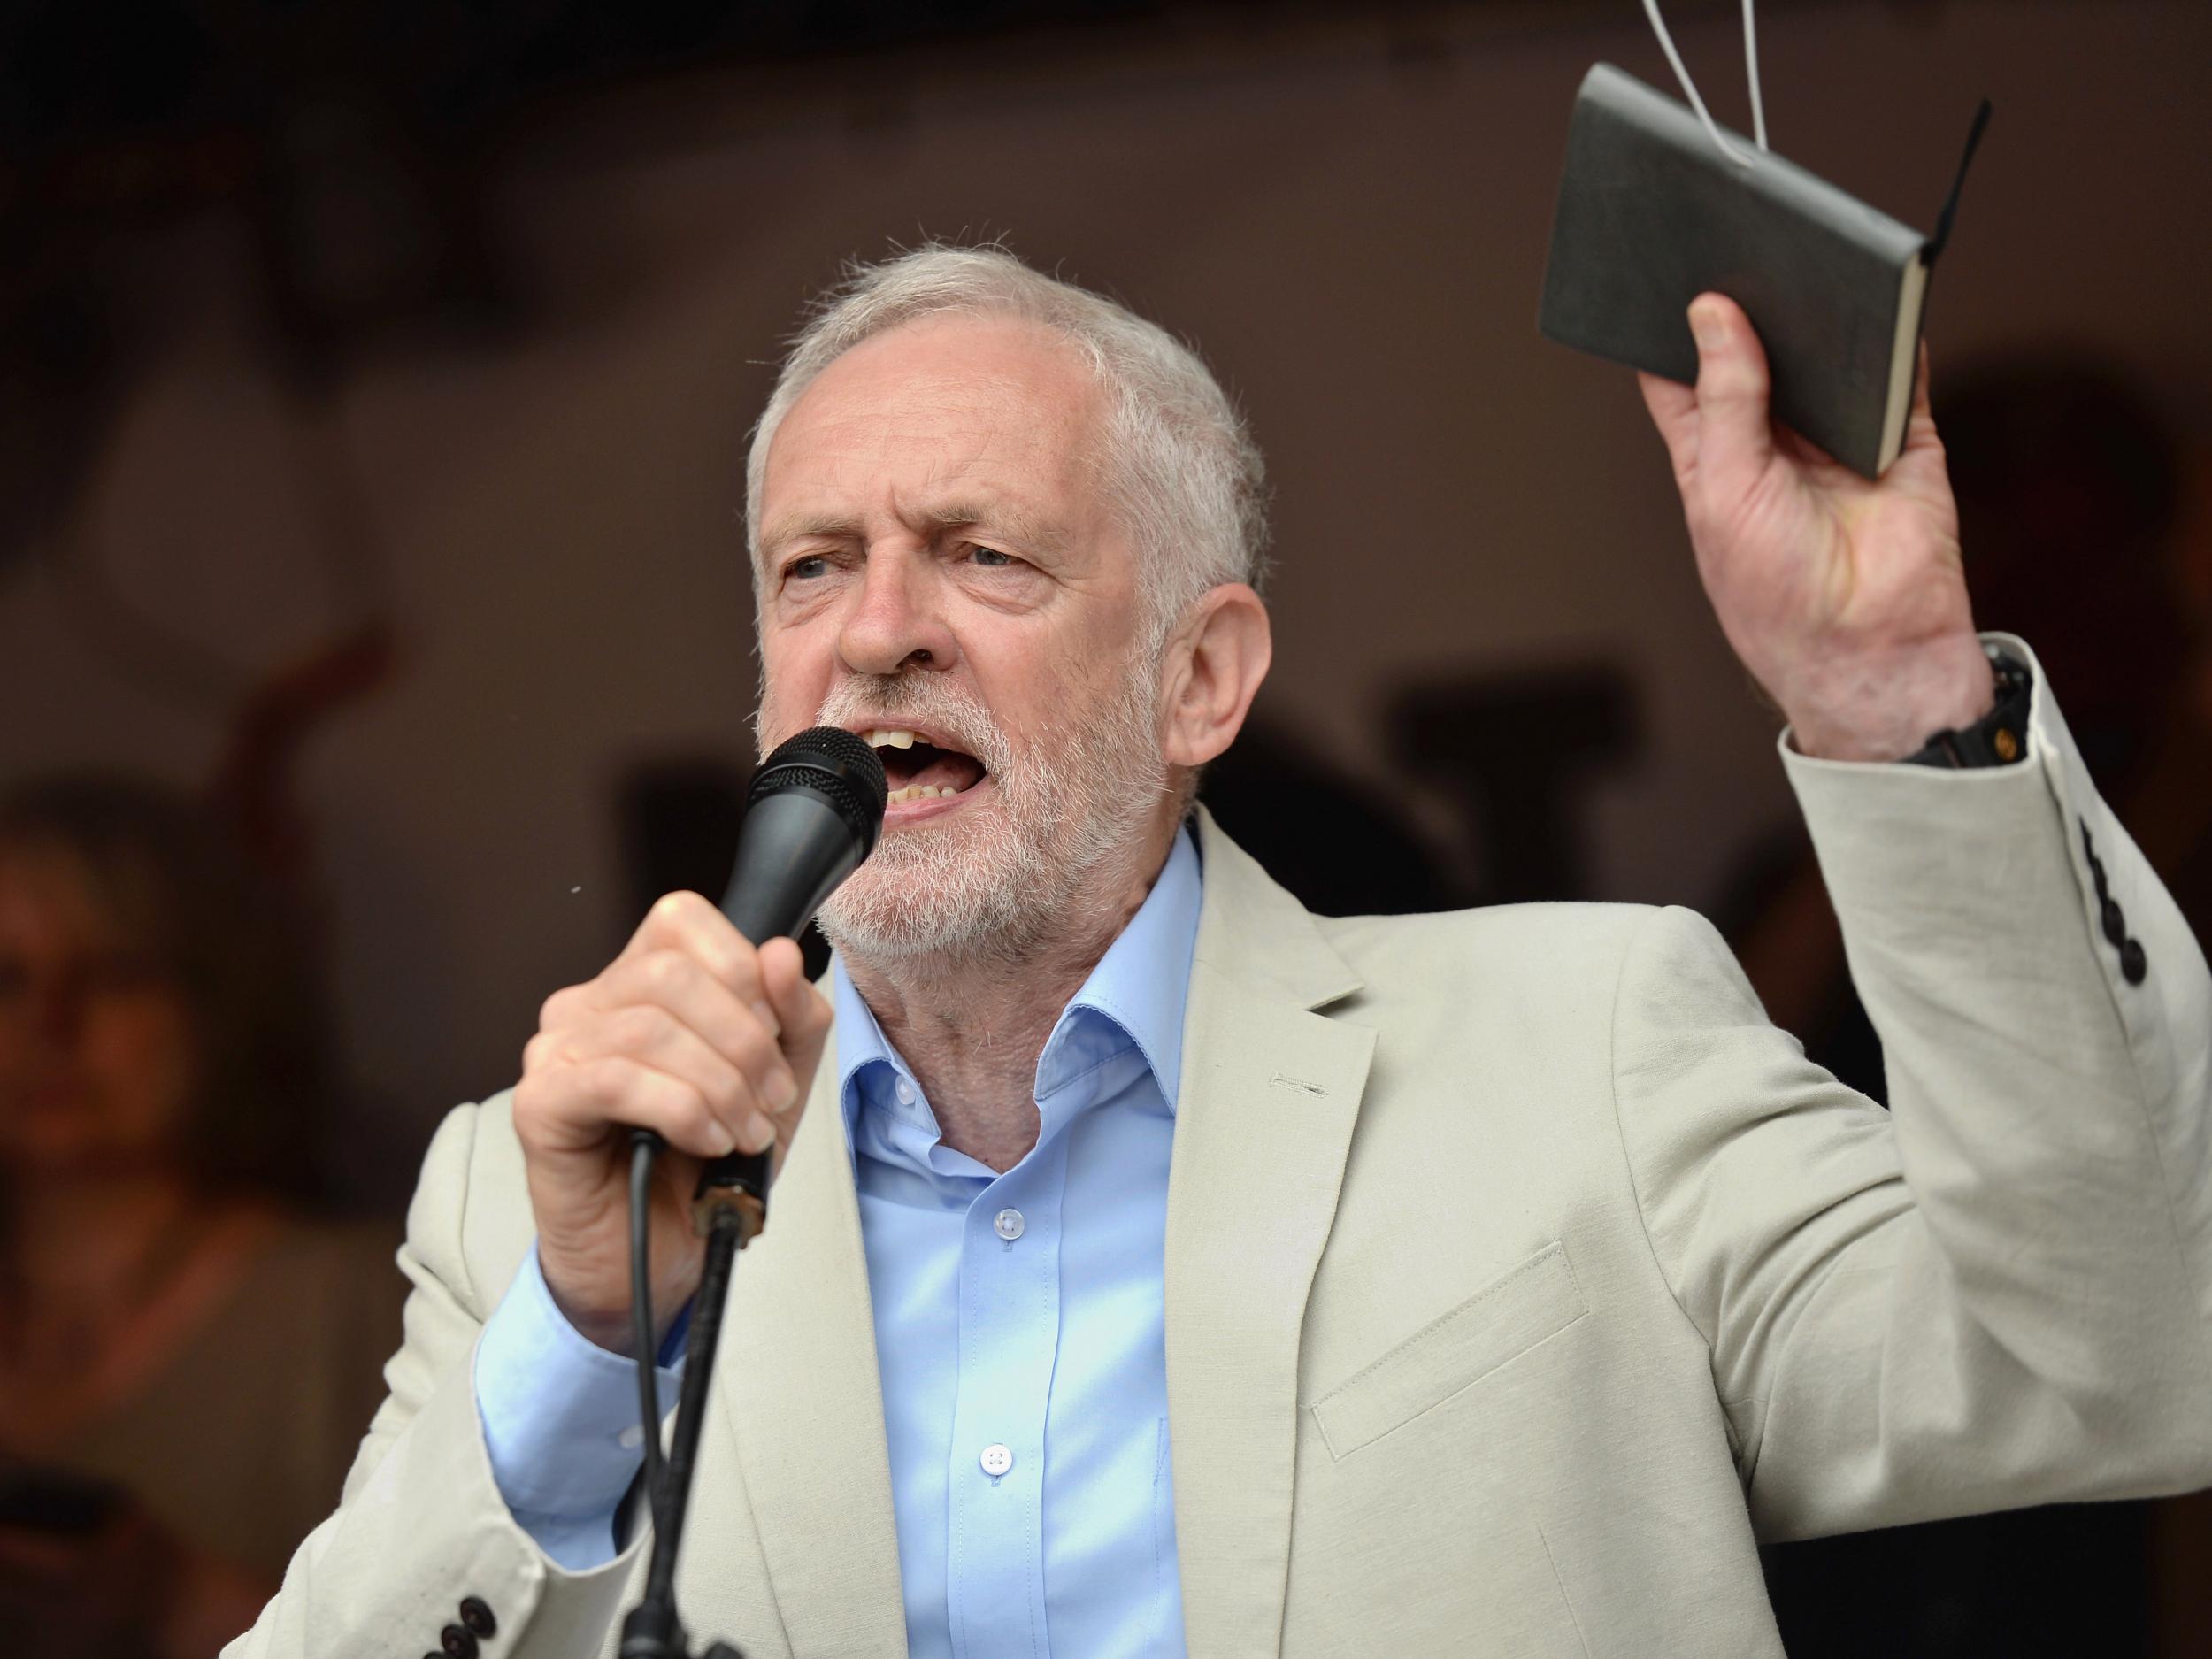 Jeremy Corbyn speaks at an anti-austerity march at Parliament Square